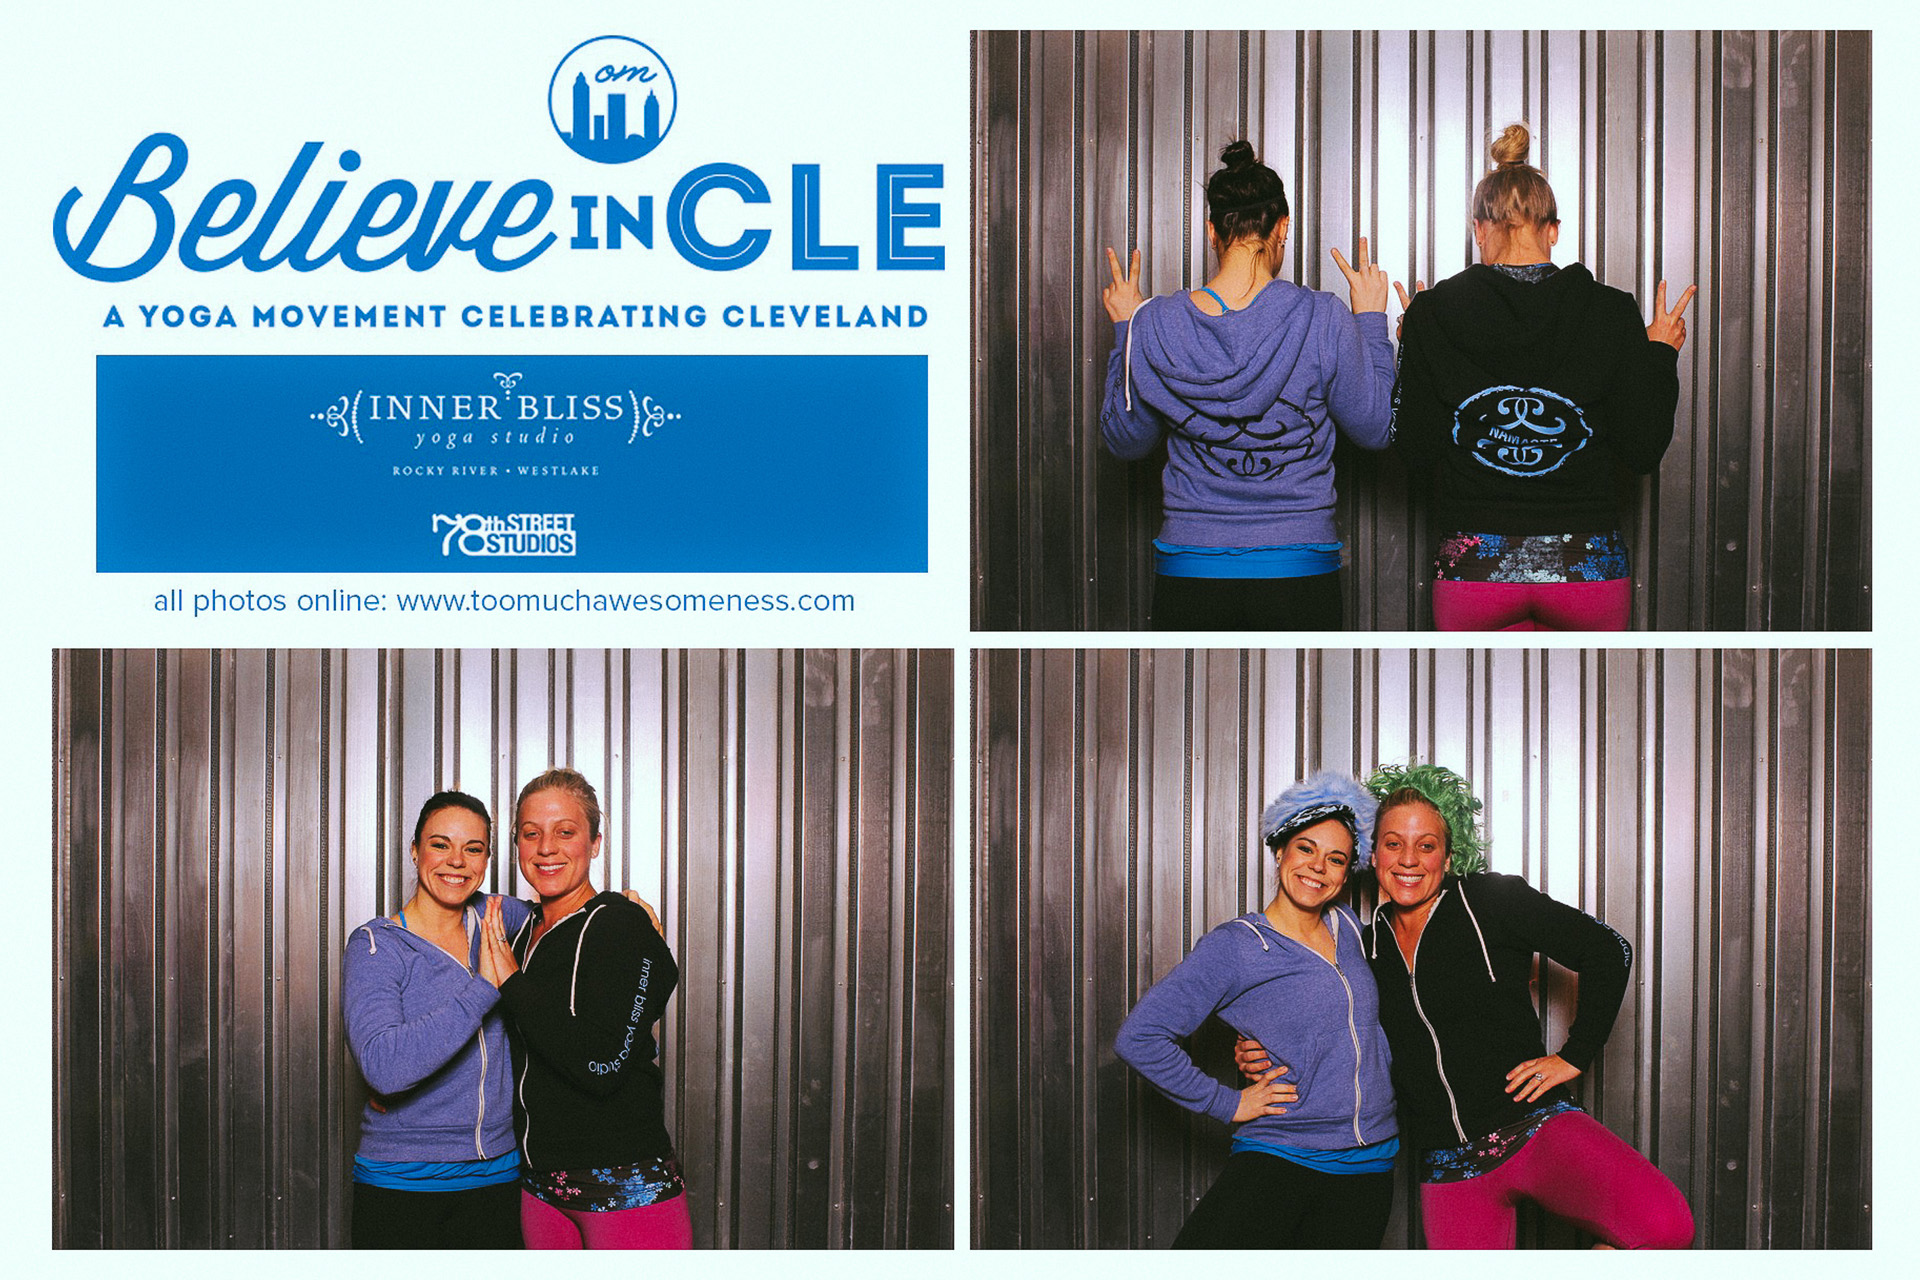 Believe in CLE Photobooth in Cleveland 01.jpg